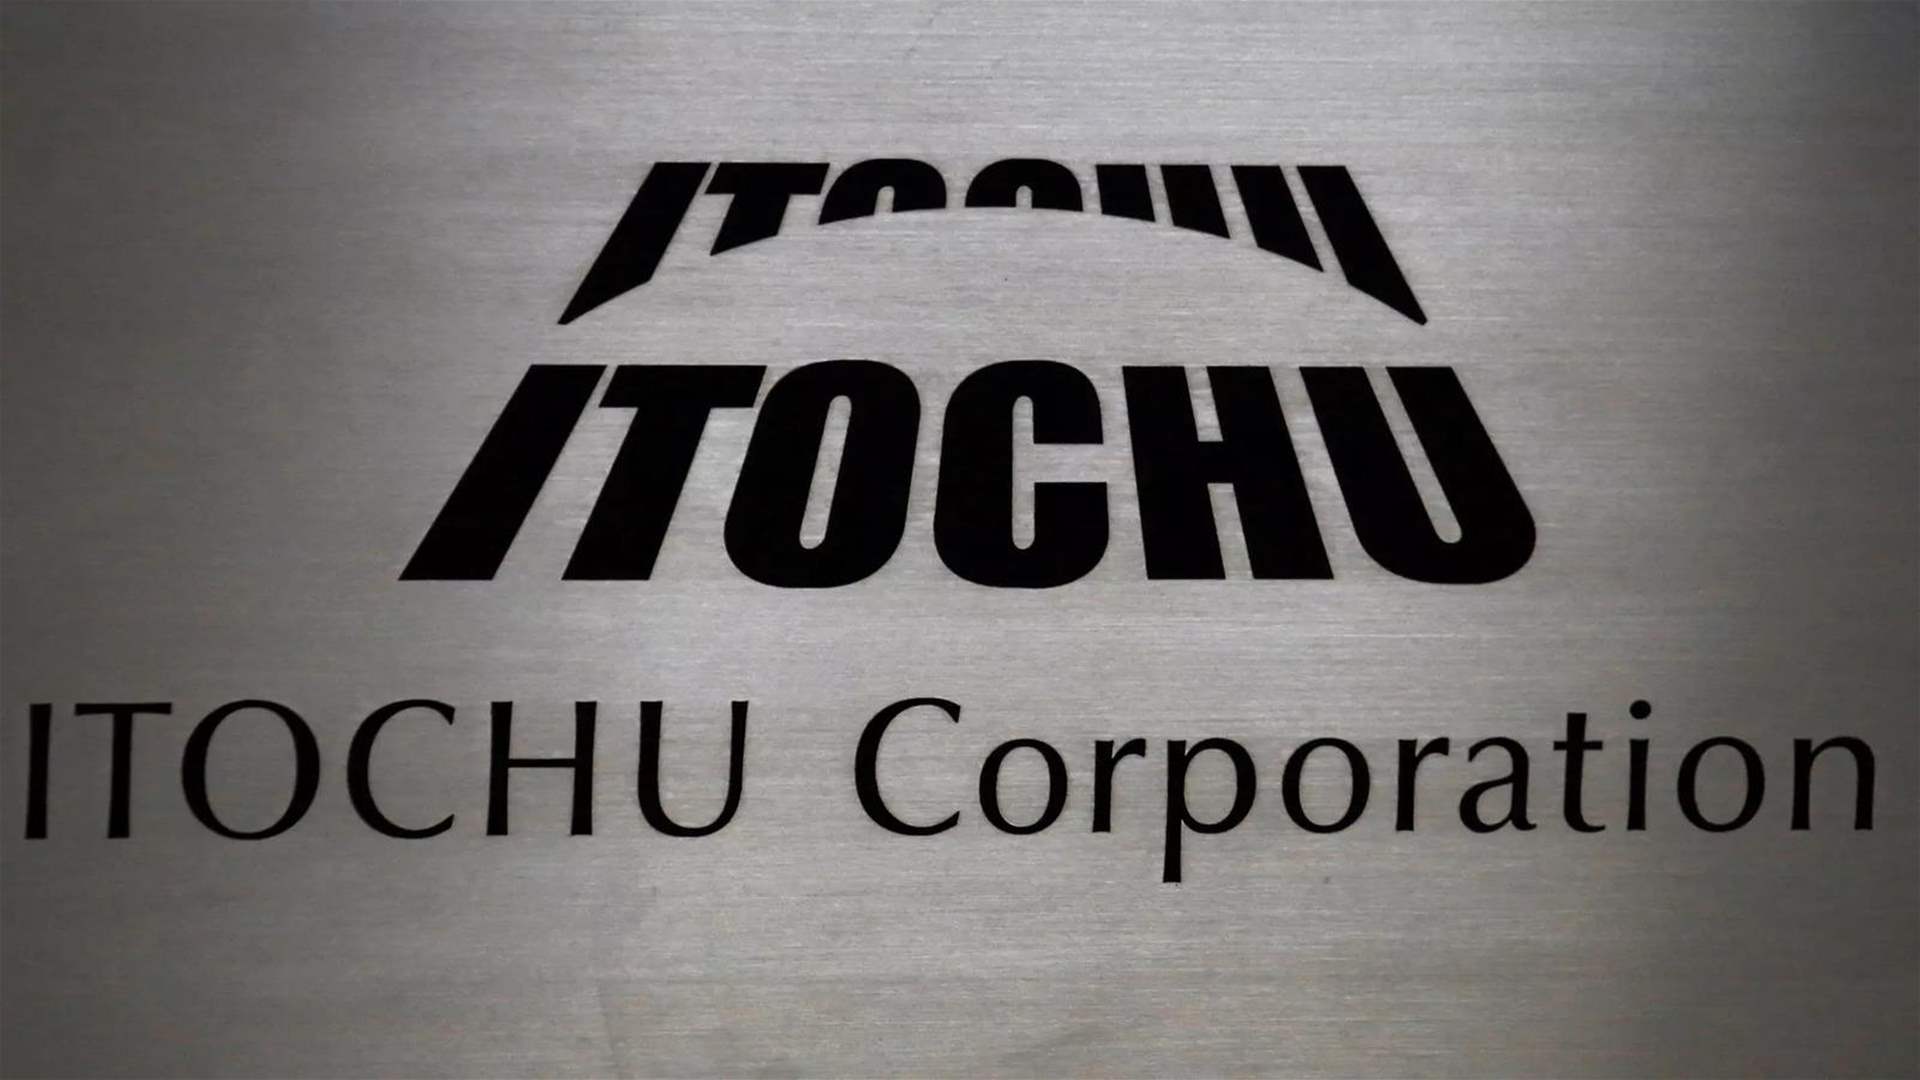 Japan&#39;s Itochu to stop cooperating with Israel&#39;s Elbit amid Gaza war